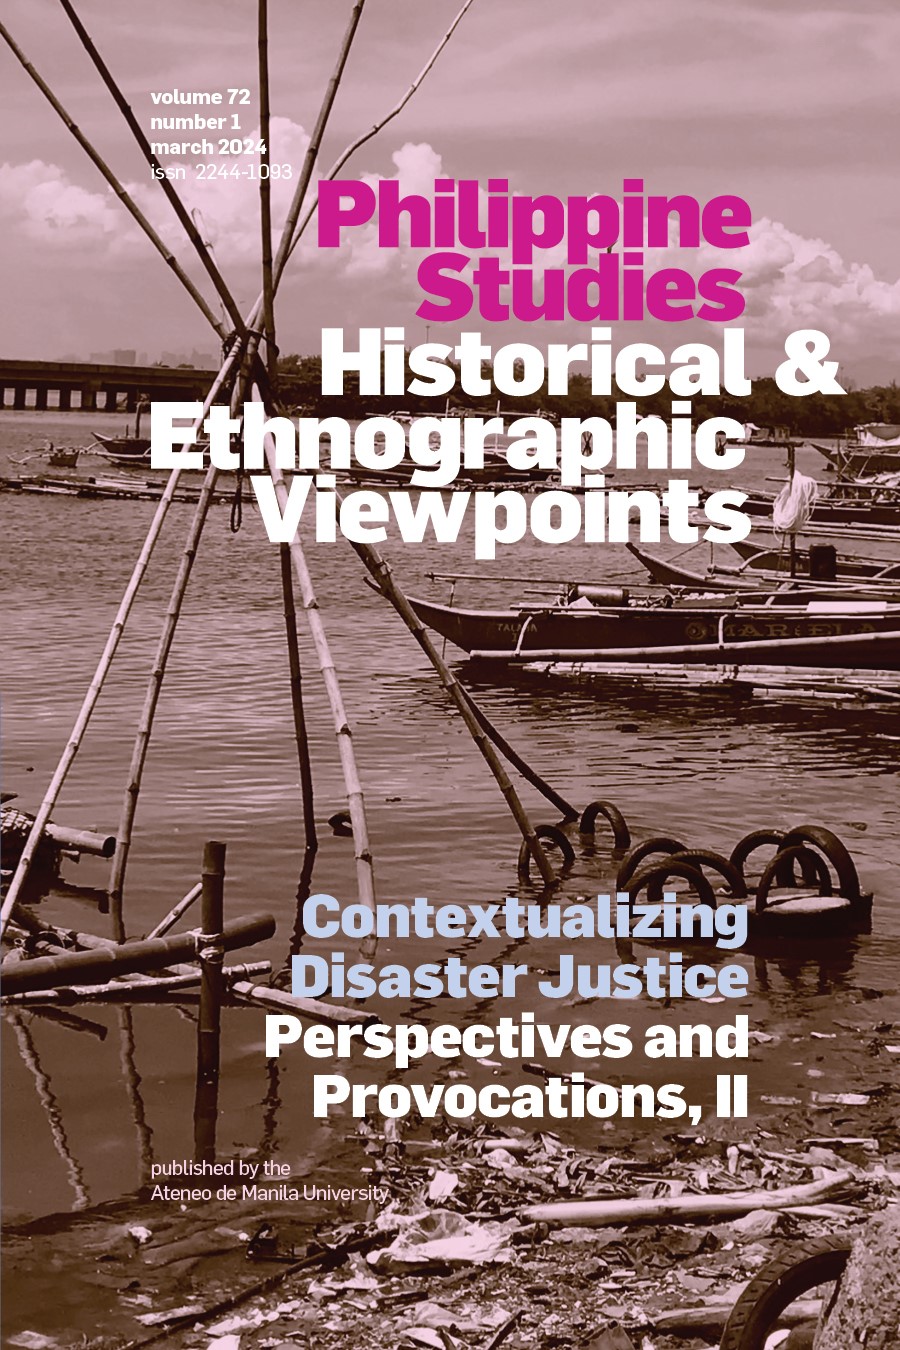 Philippine Studies: Historical and Ethnographic Viewpoints Image